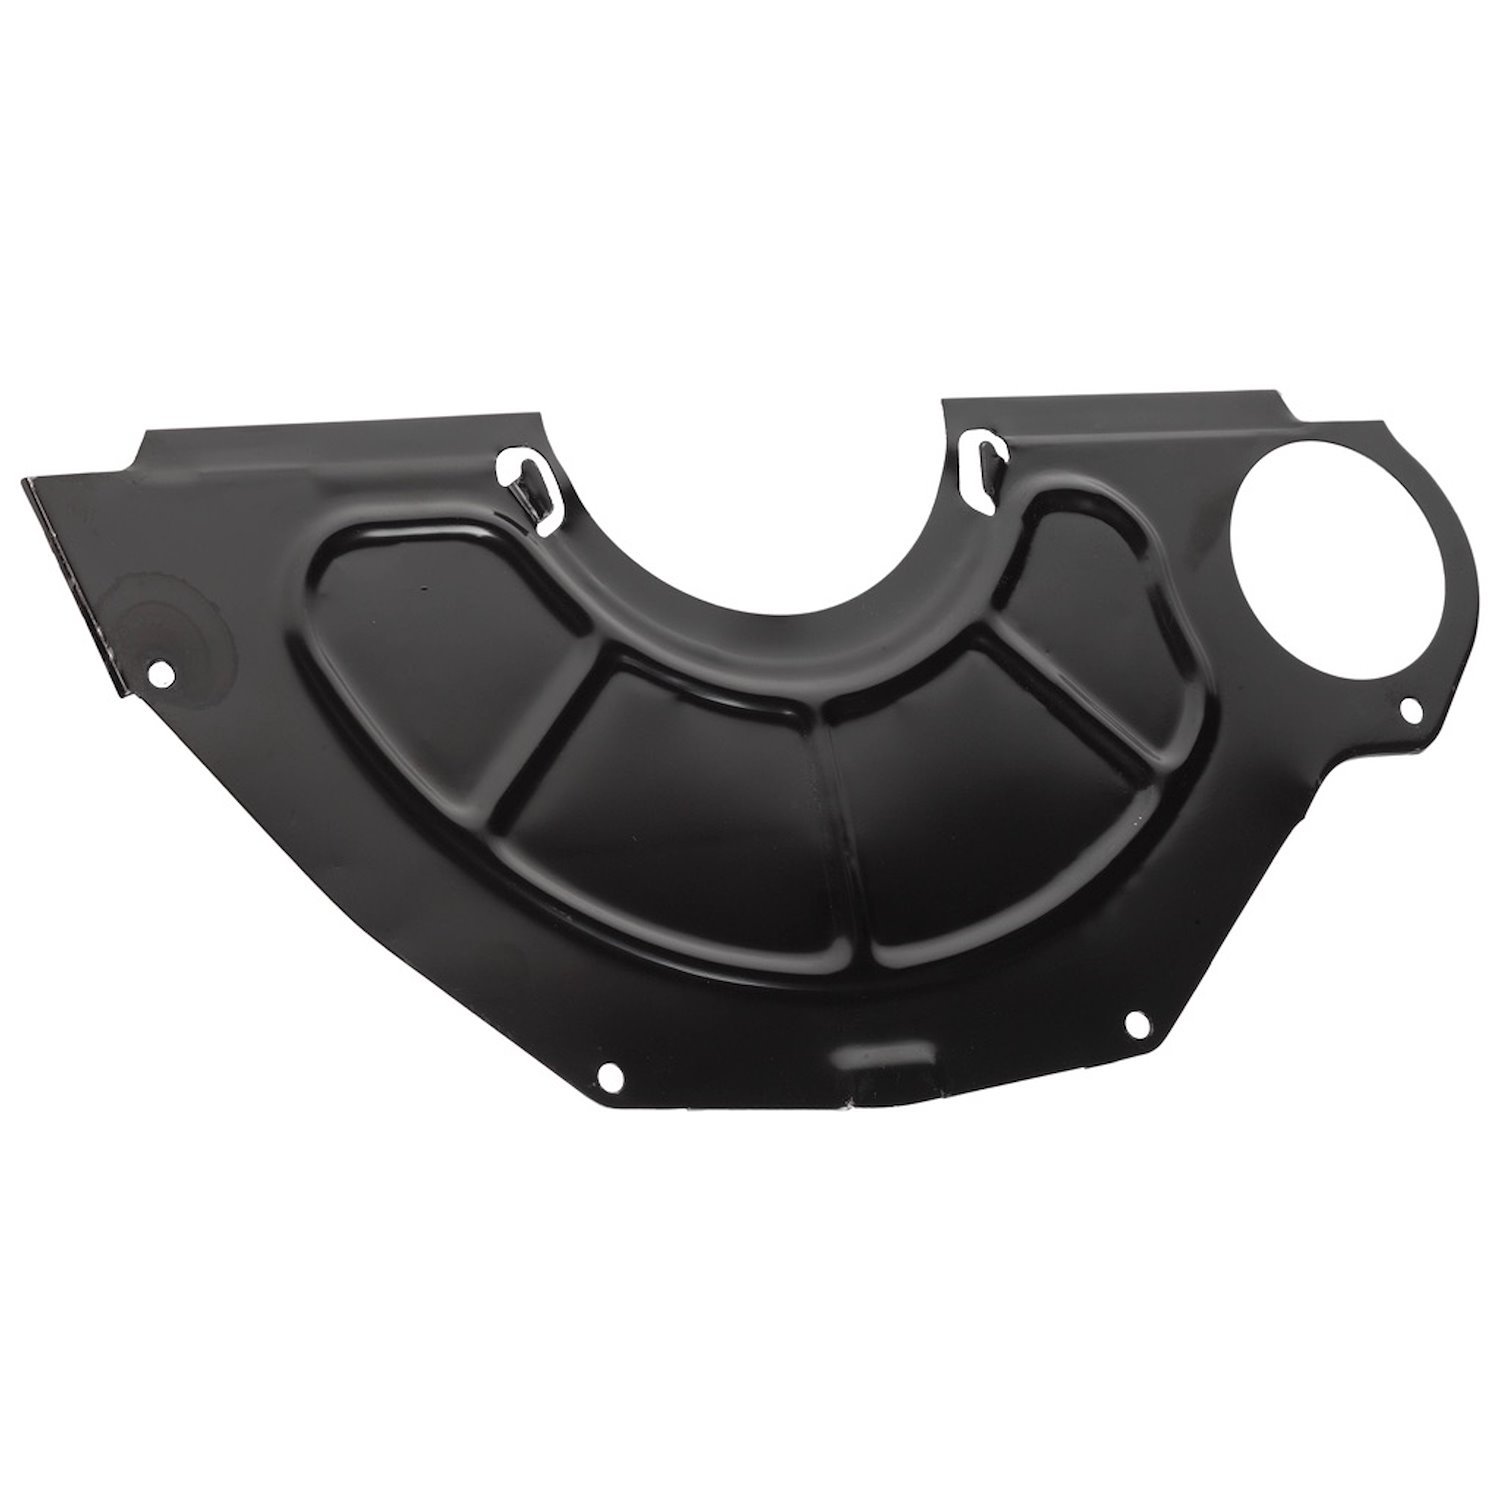 Inspection Cover Chevy 621 Bellhousing